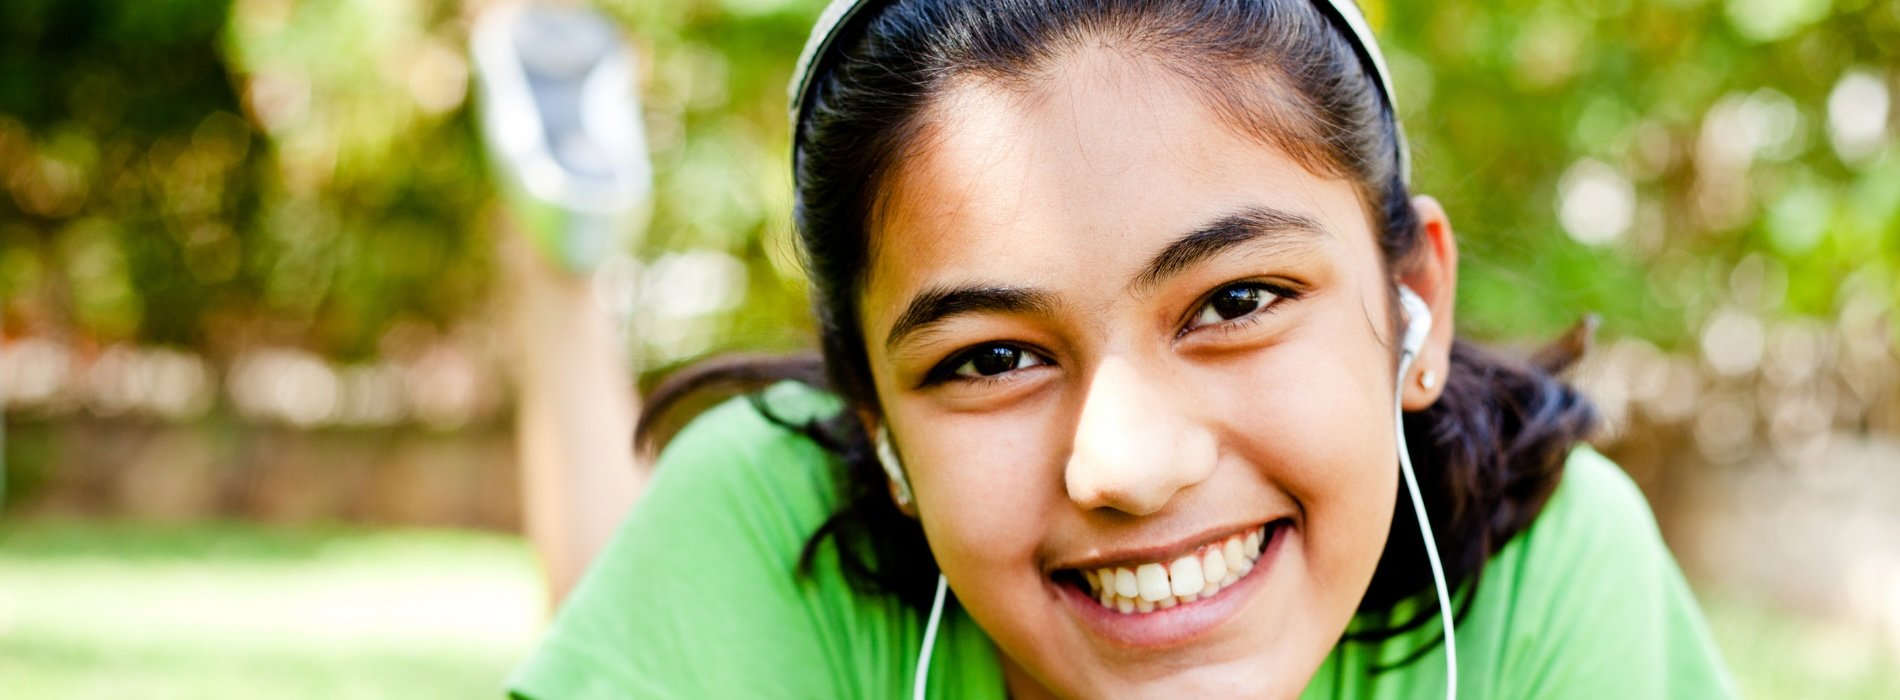 Smiling girl with headphones